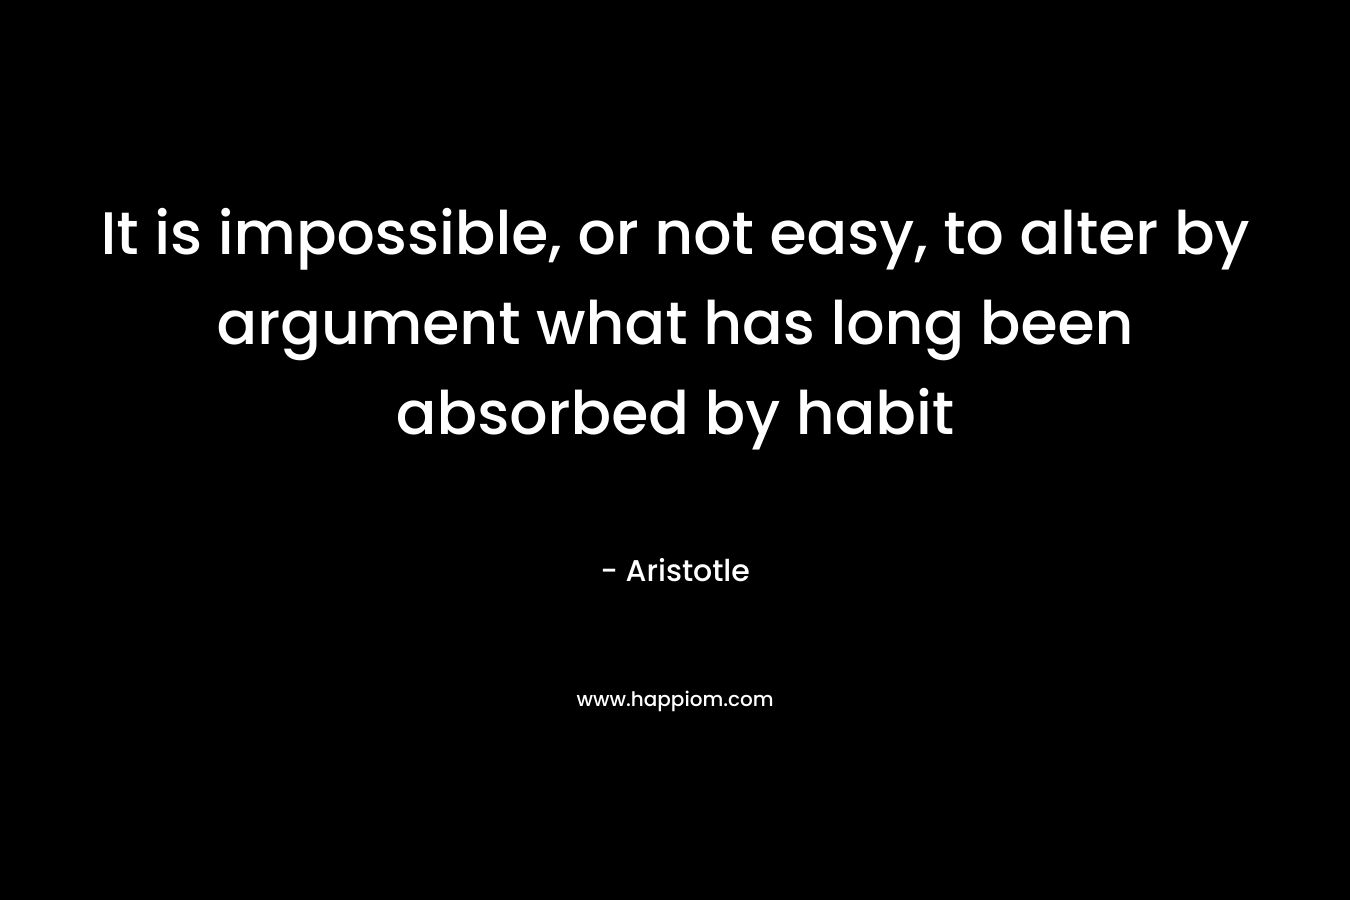 It is impossible, or not easy, to alter by argument what has long been absorbed by habit – Aristotle